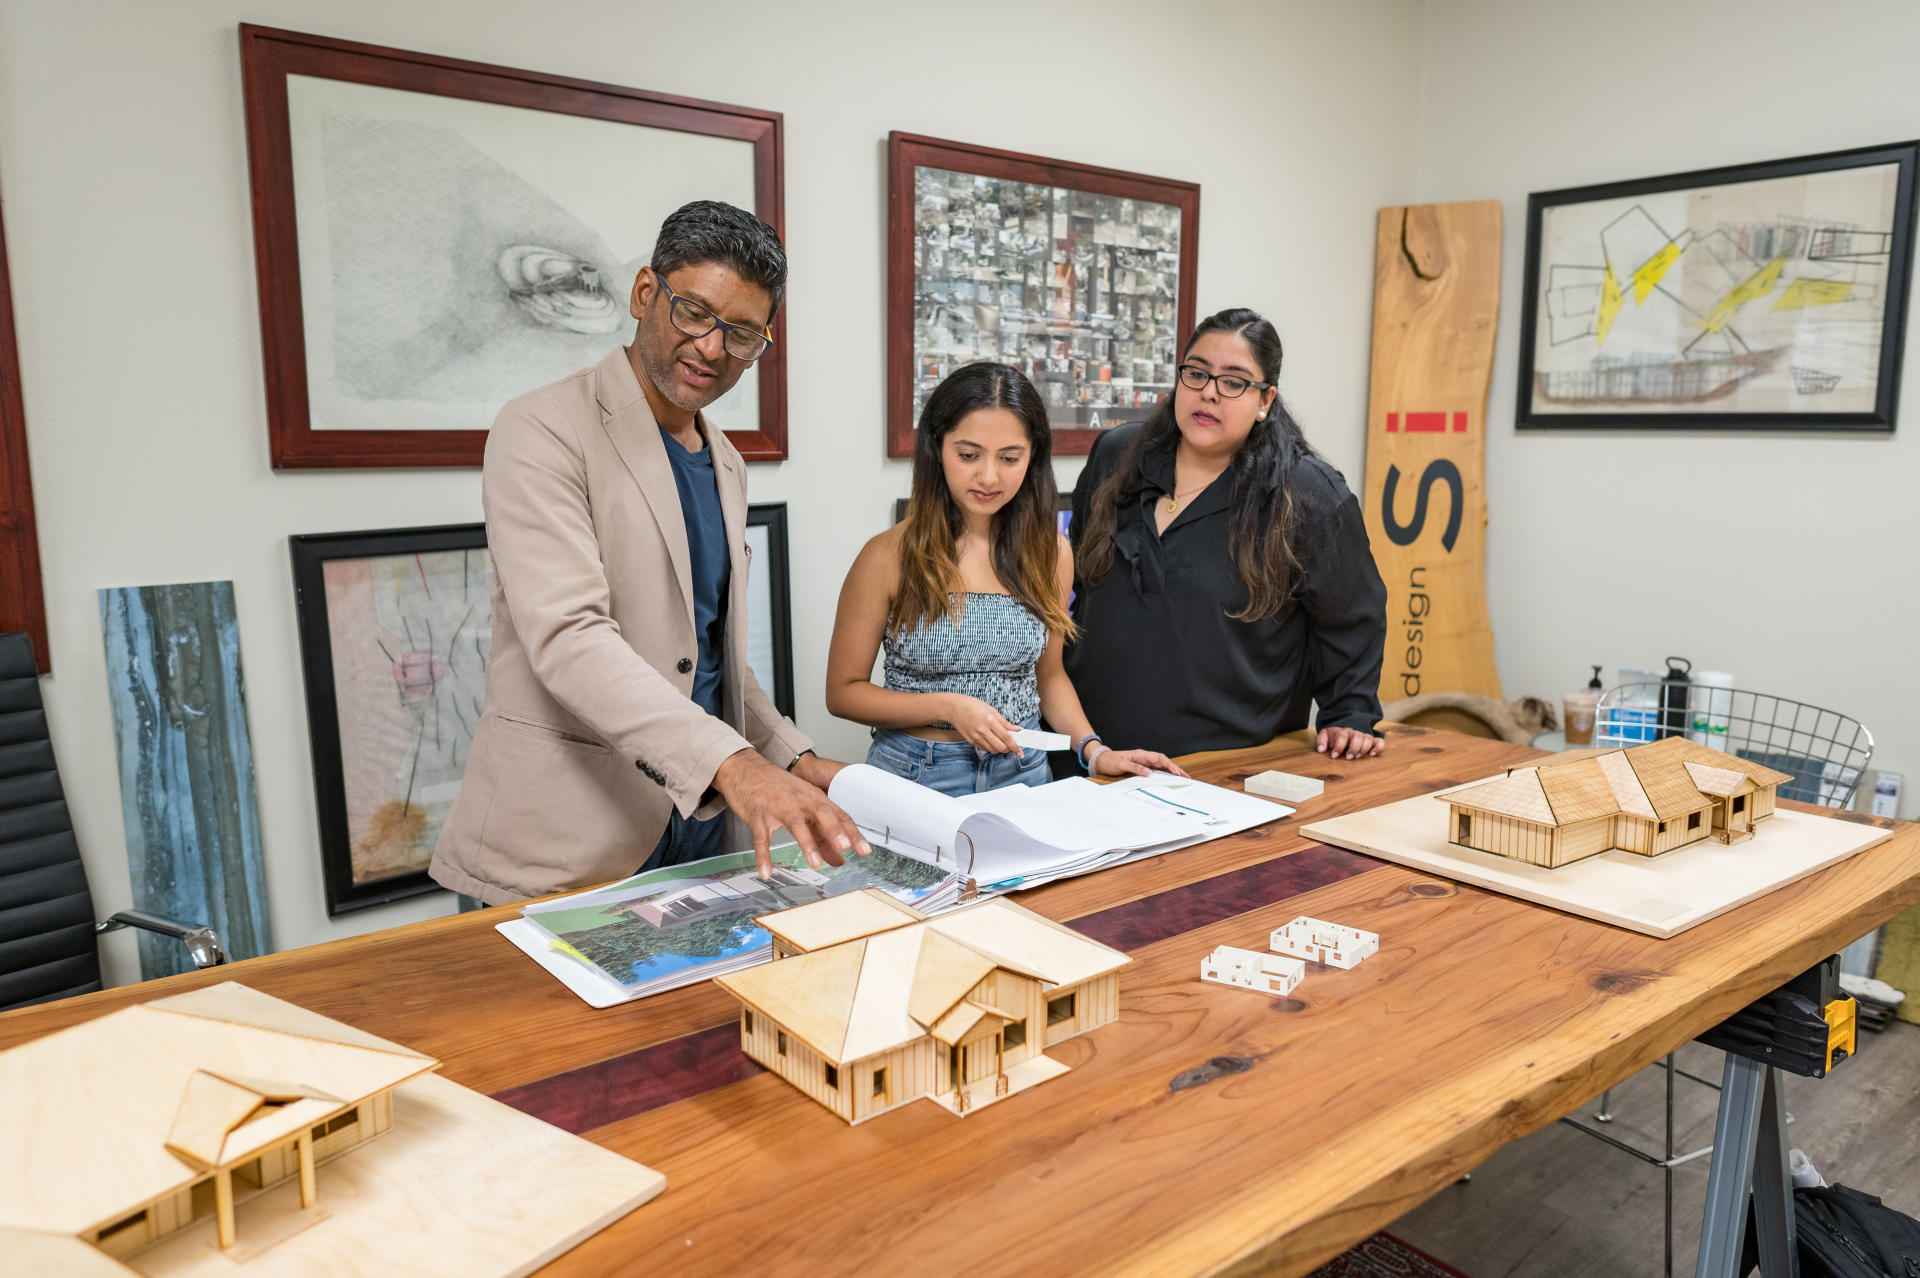 Professor Rouben Mohiuddin works with students on home designs.